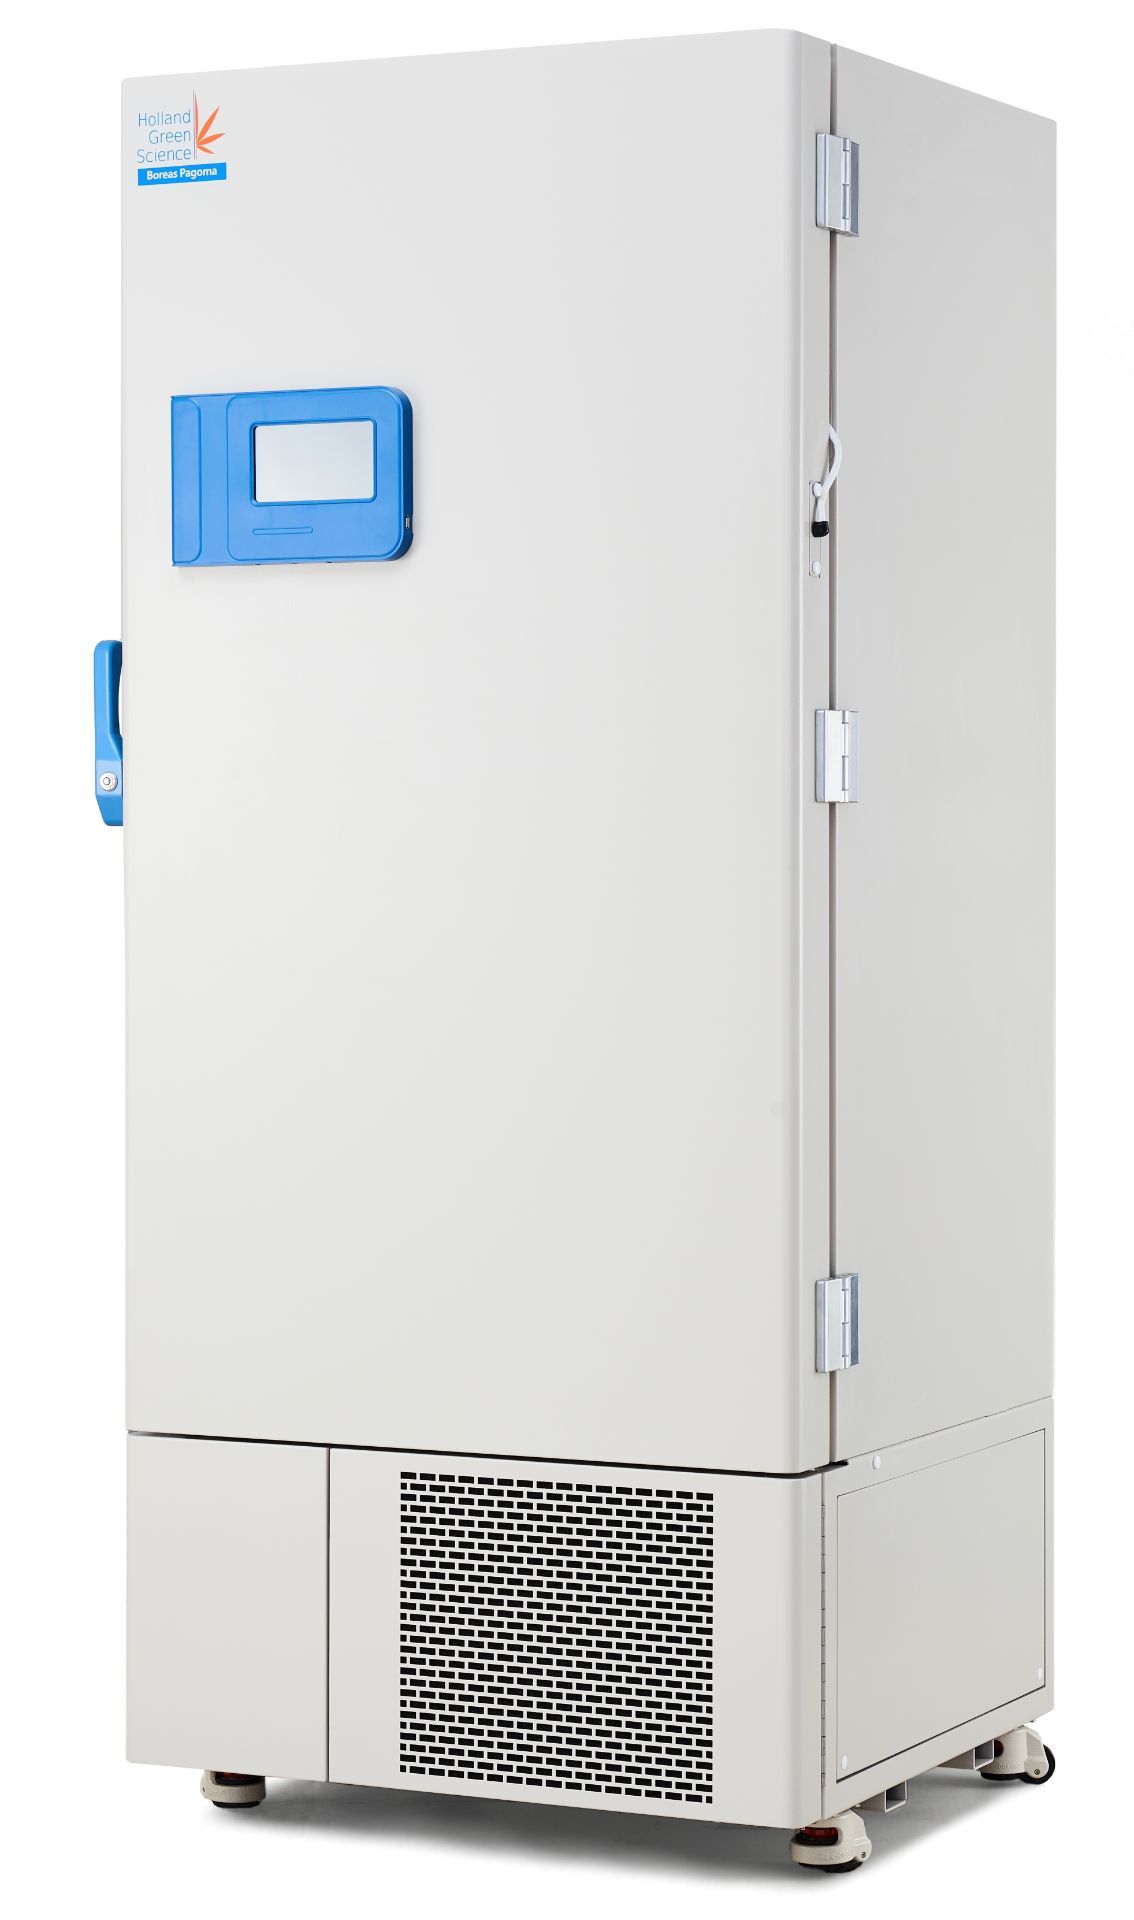 Lot of (2) New/Unused Holland Green Science -80C Ultra Low Industrial Freezer. Model Boreas Pagoma - Image 3 of 3